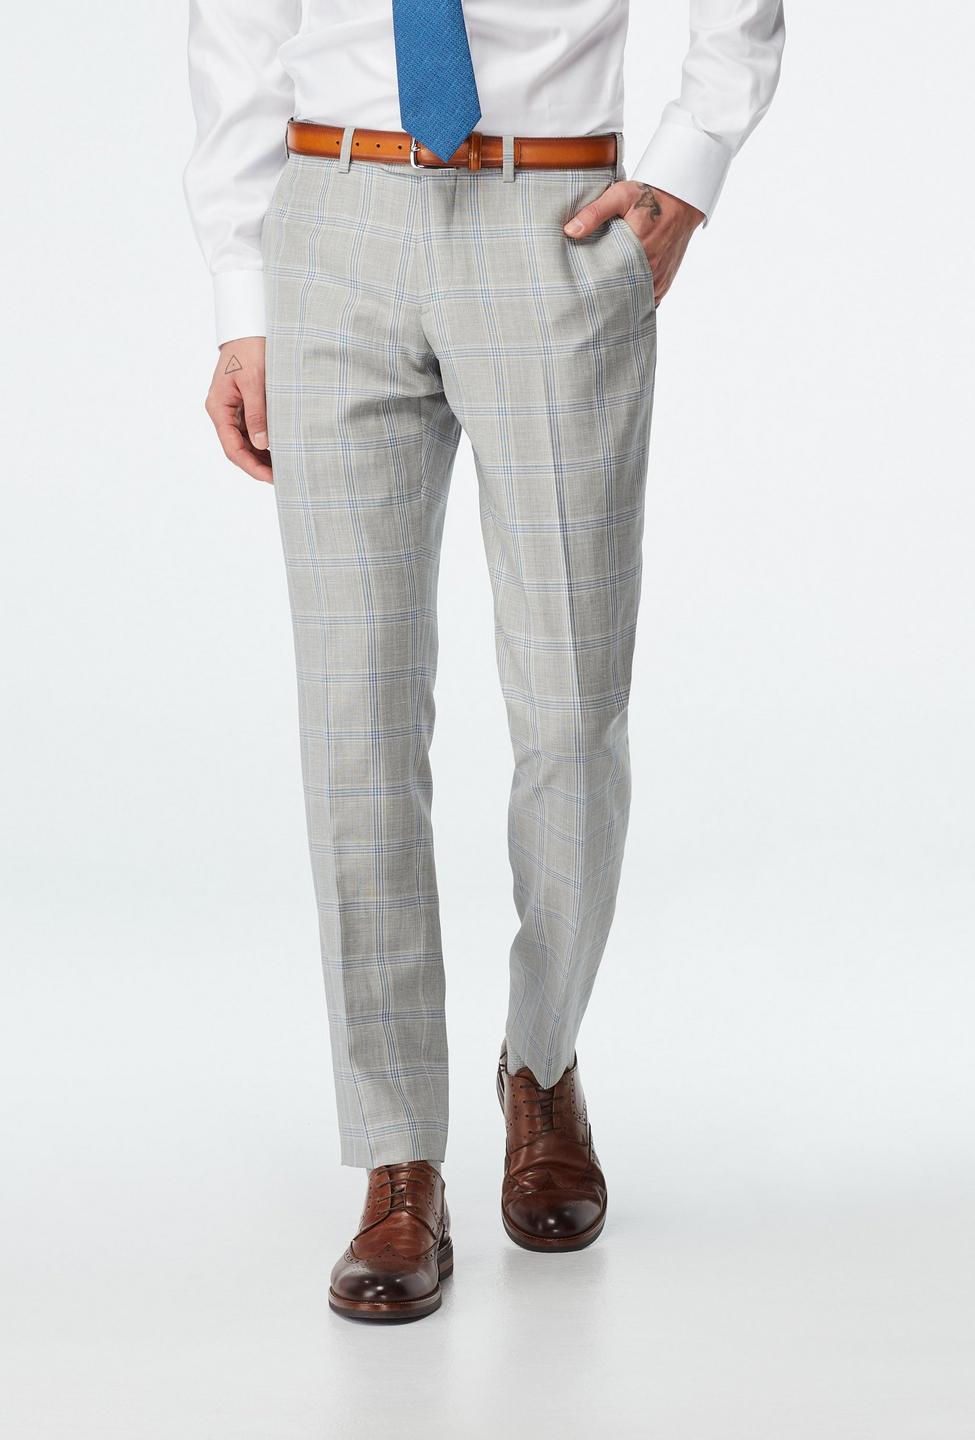 Gray pants - Southwell Plaid Design from Seasonal Indochino Collection